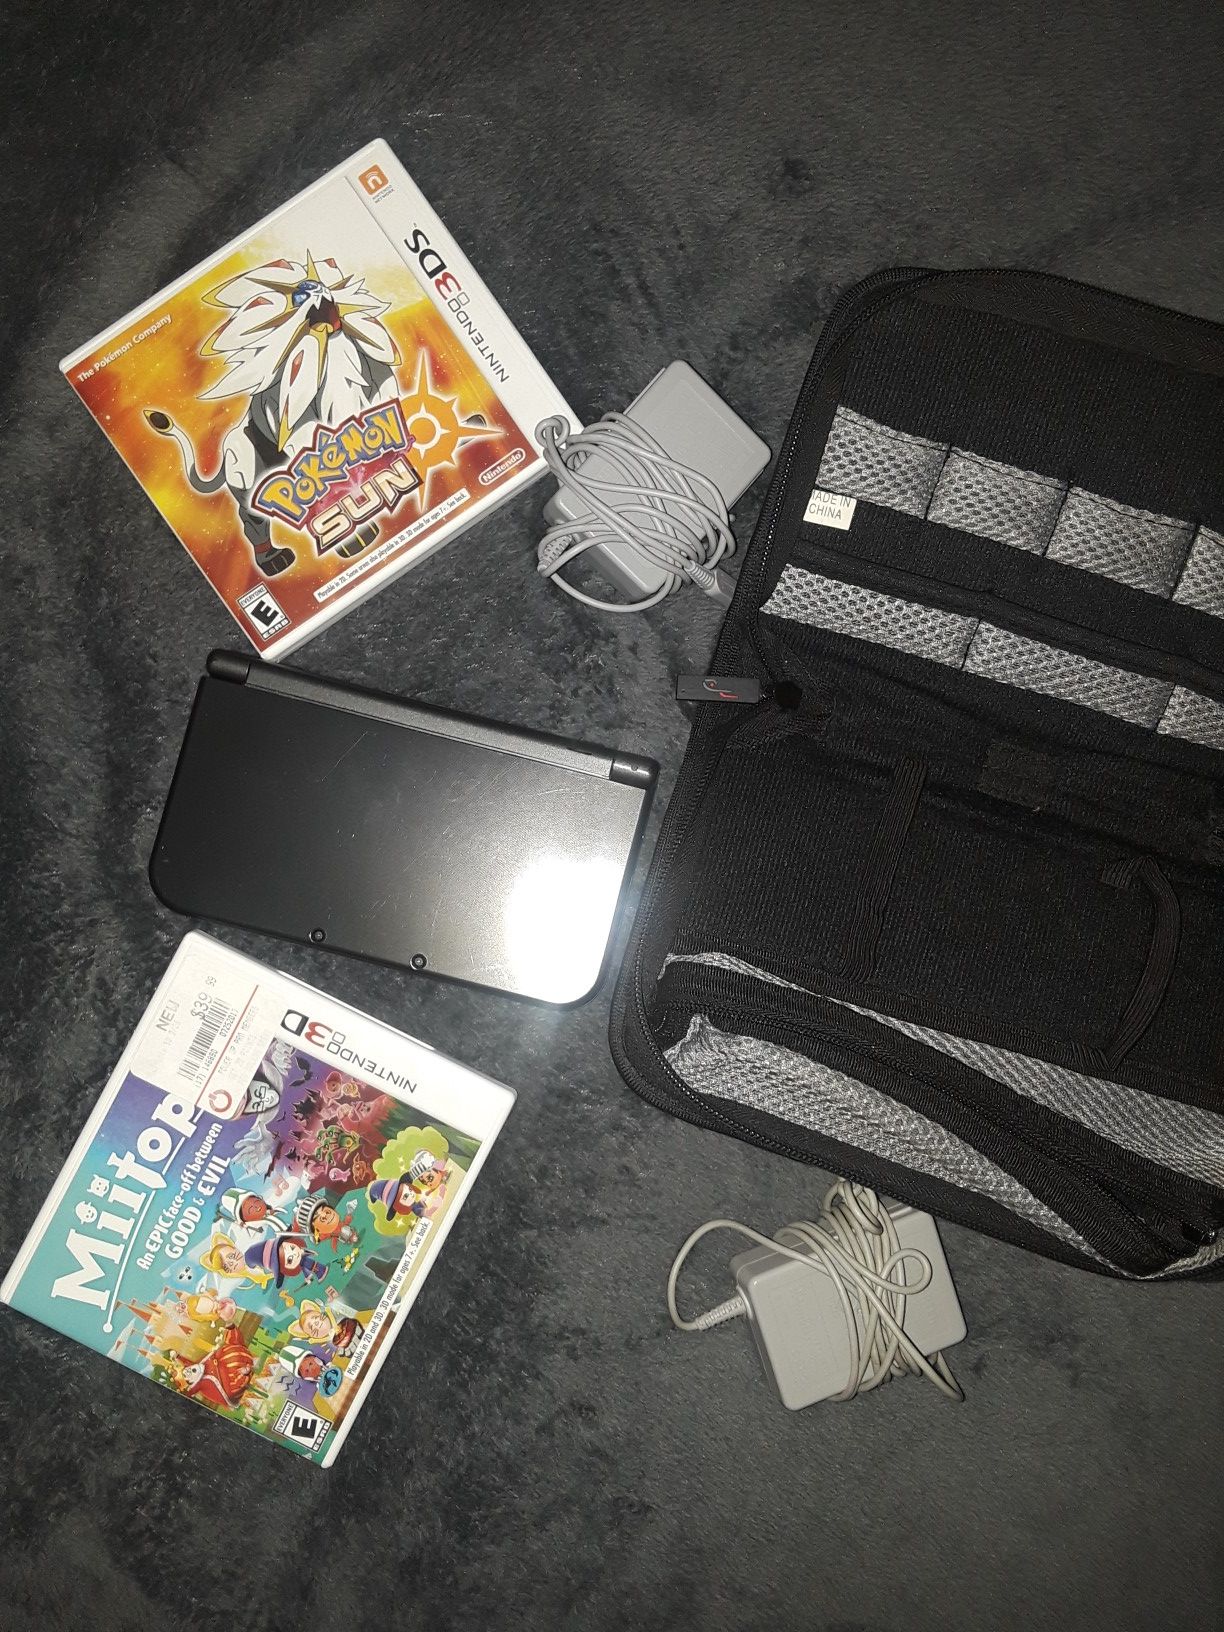 Nintendo 3ds XL , Blake Case, 2 Games and 2 Chargers